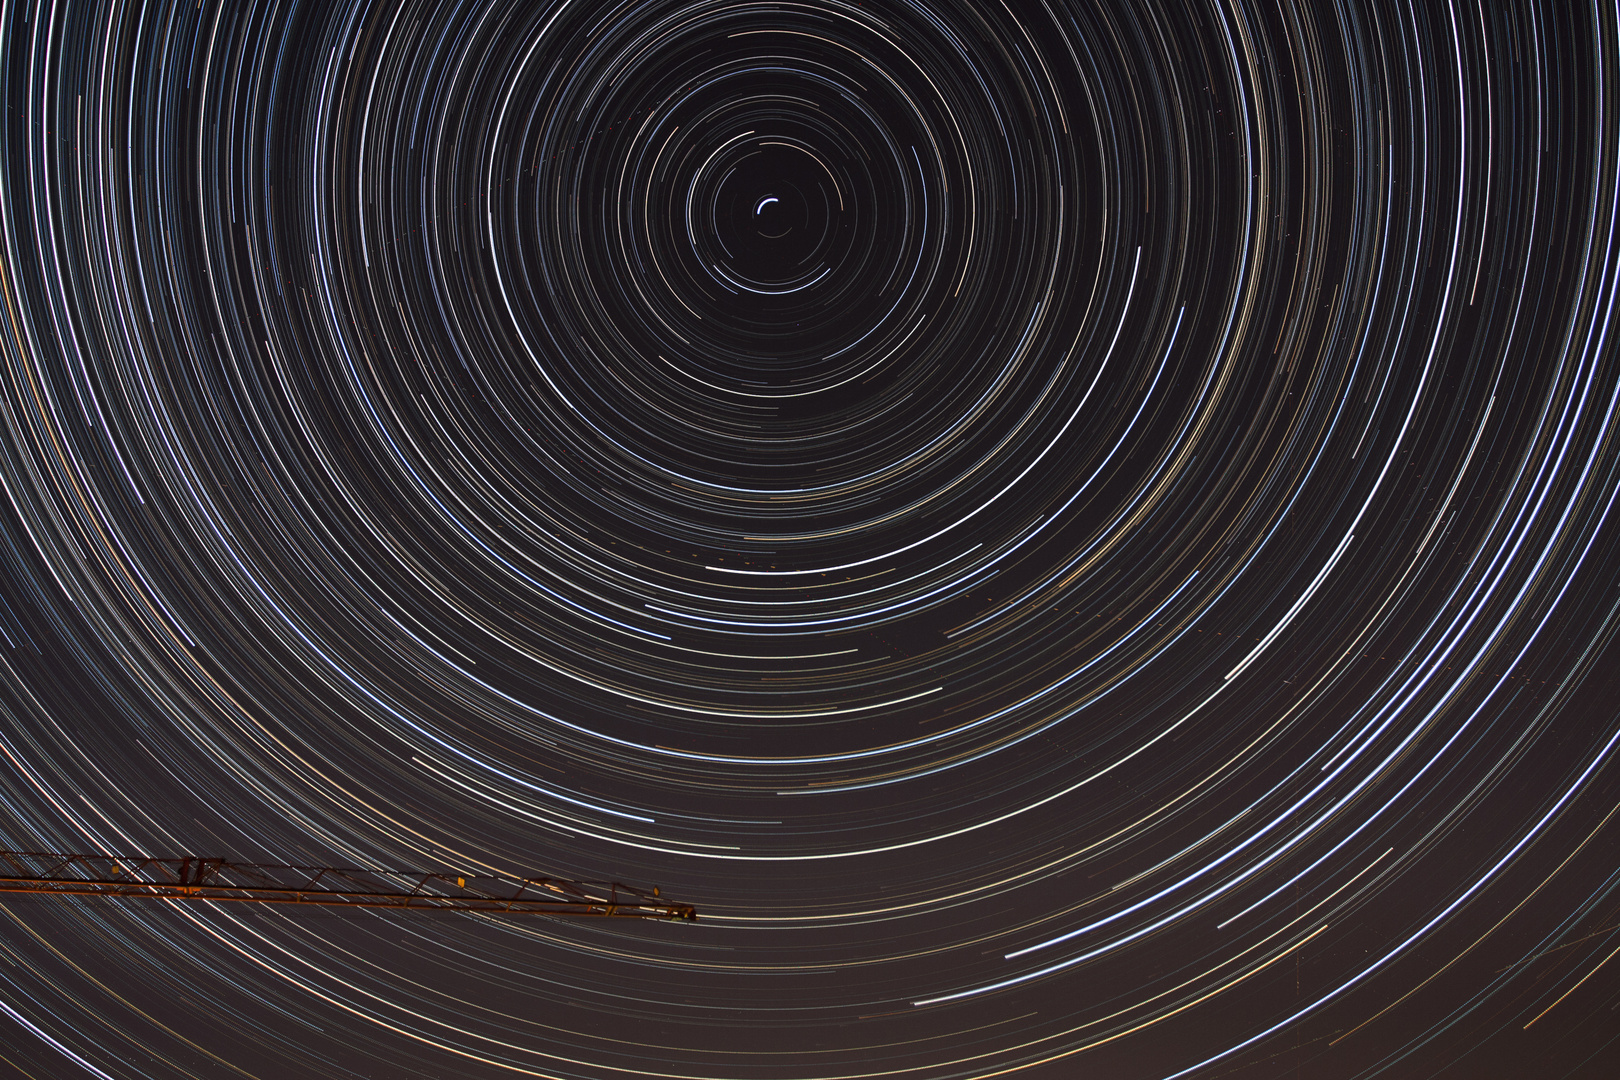 Startrails from Bochum